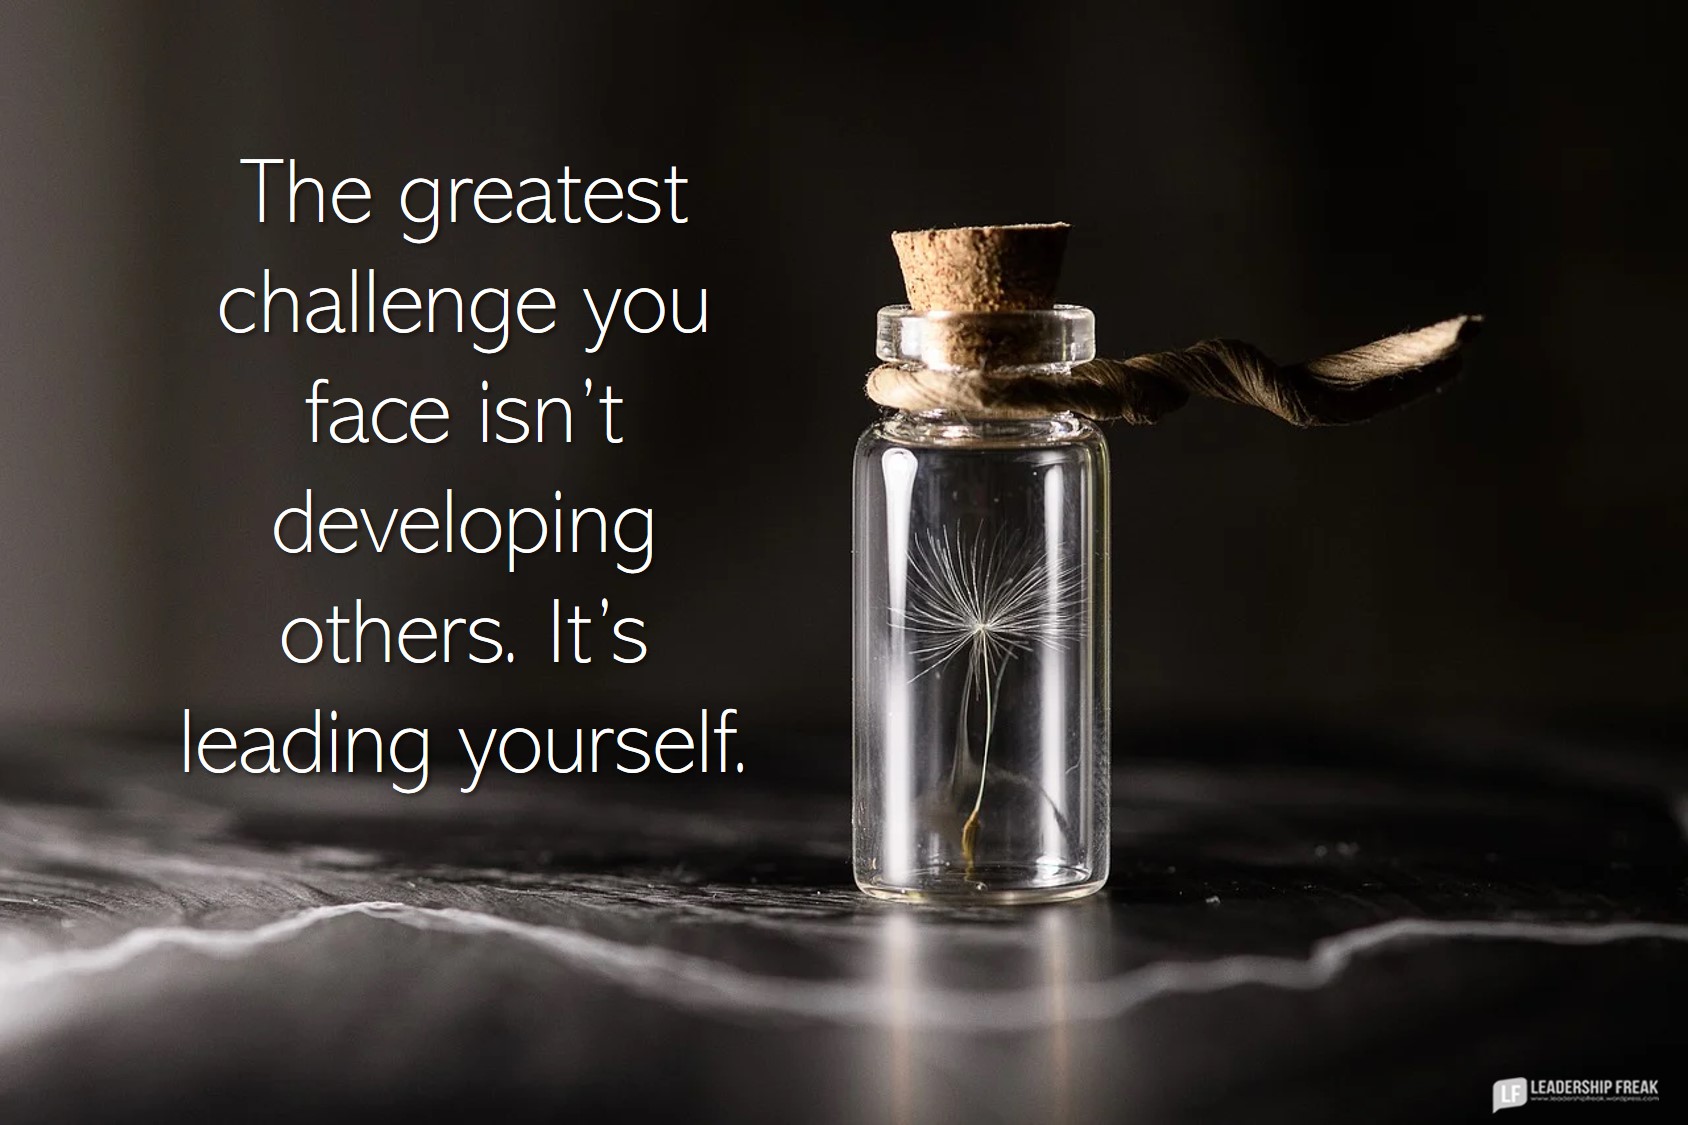 Bottled up.

The greatest challenge you face isn't developing others. It's leading yourself.